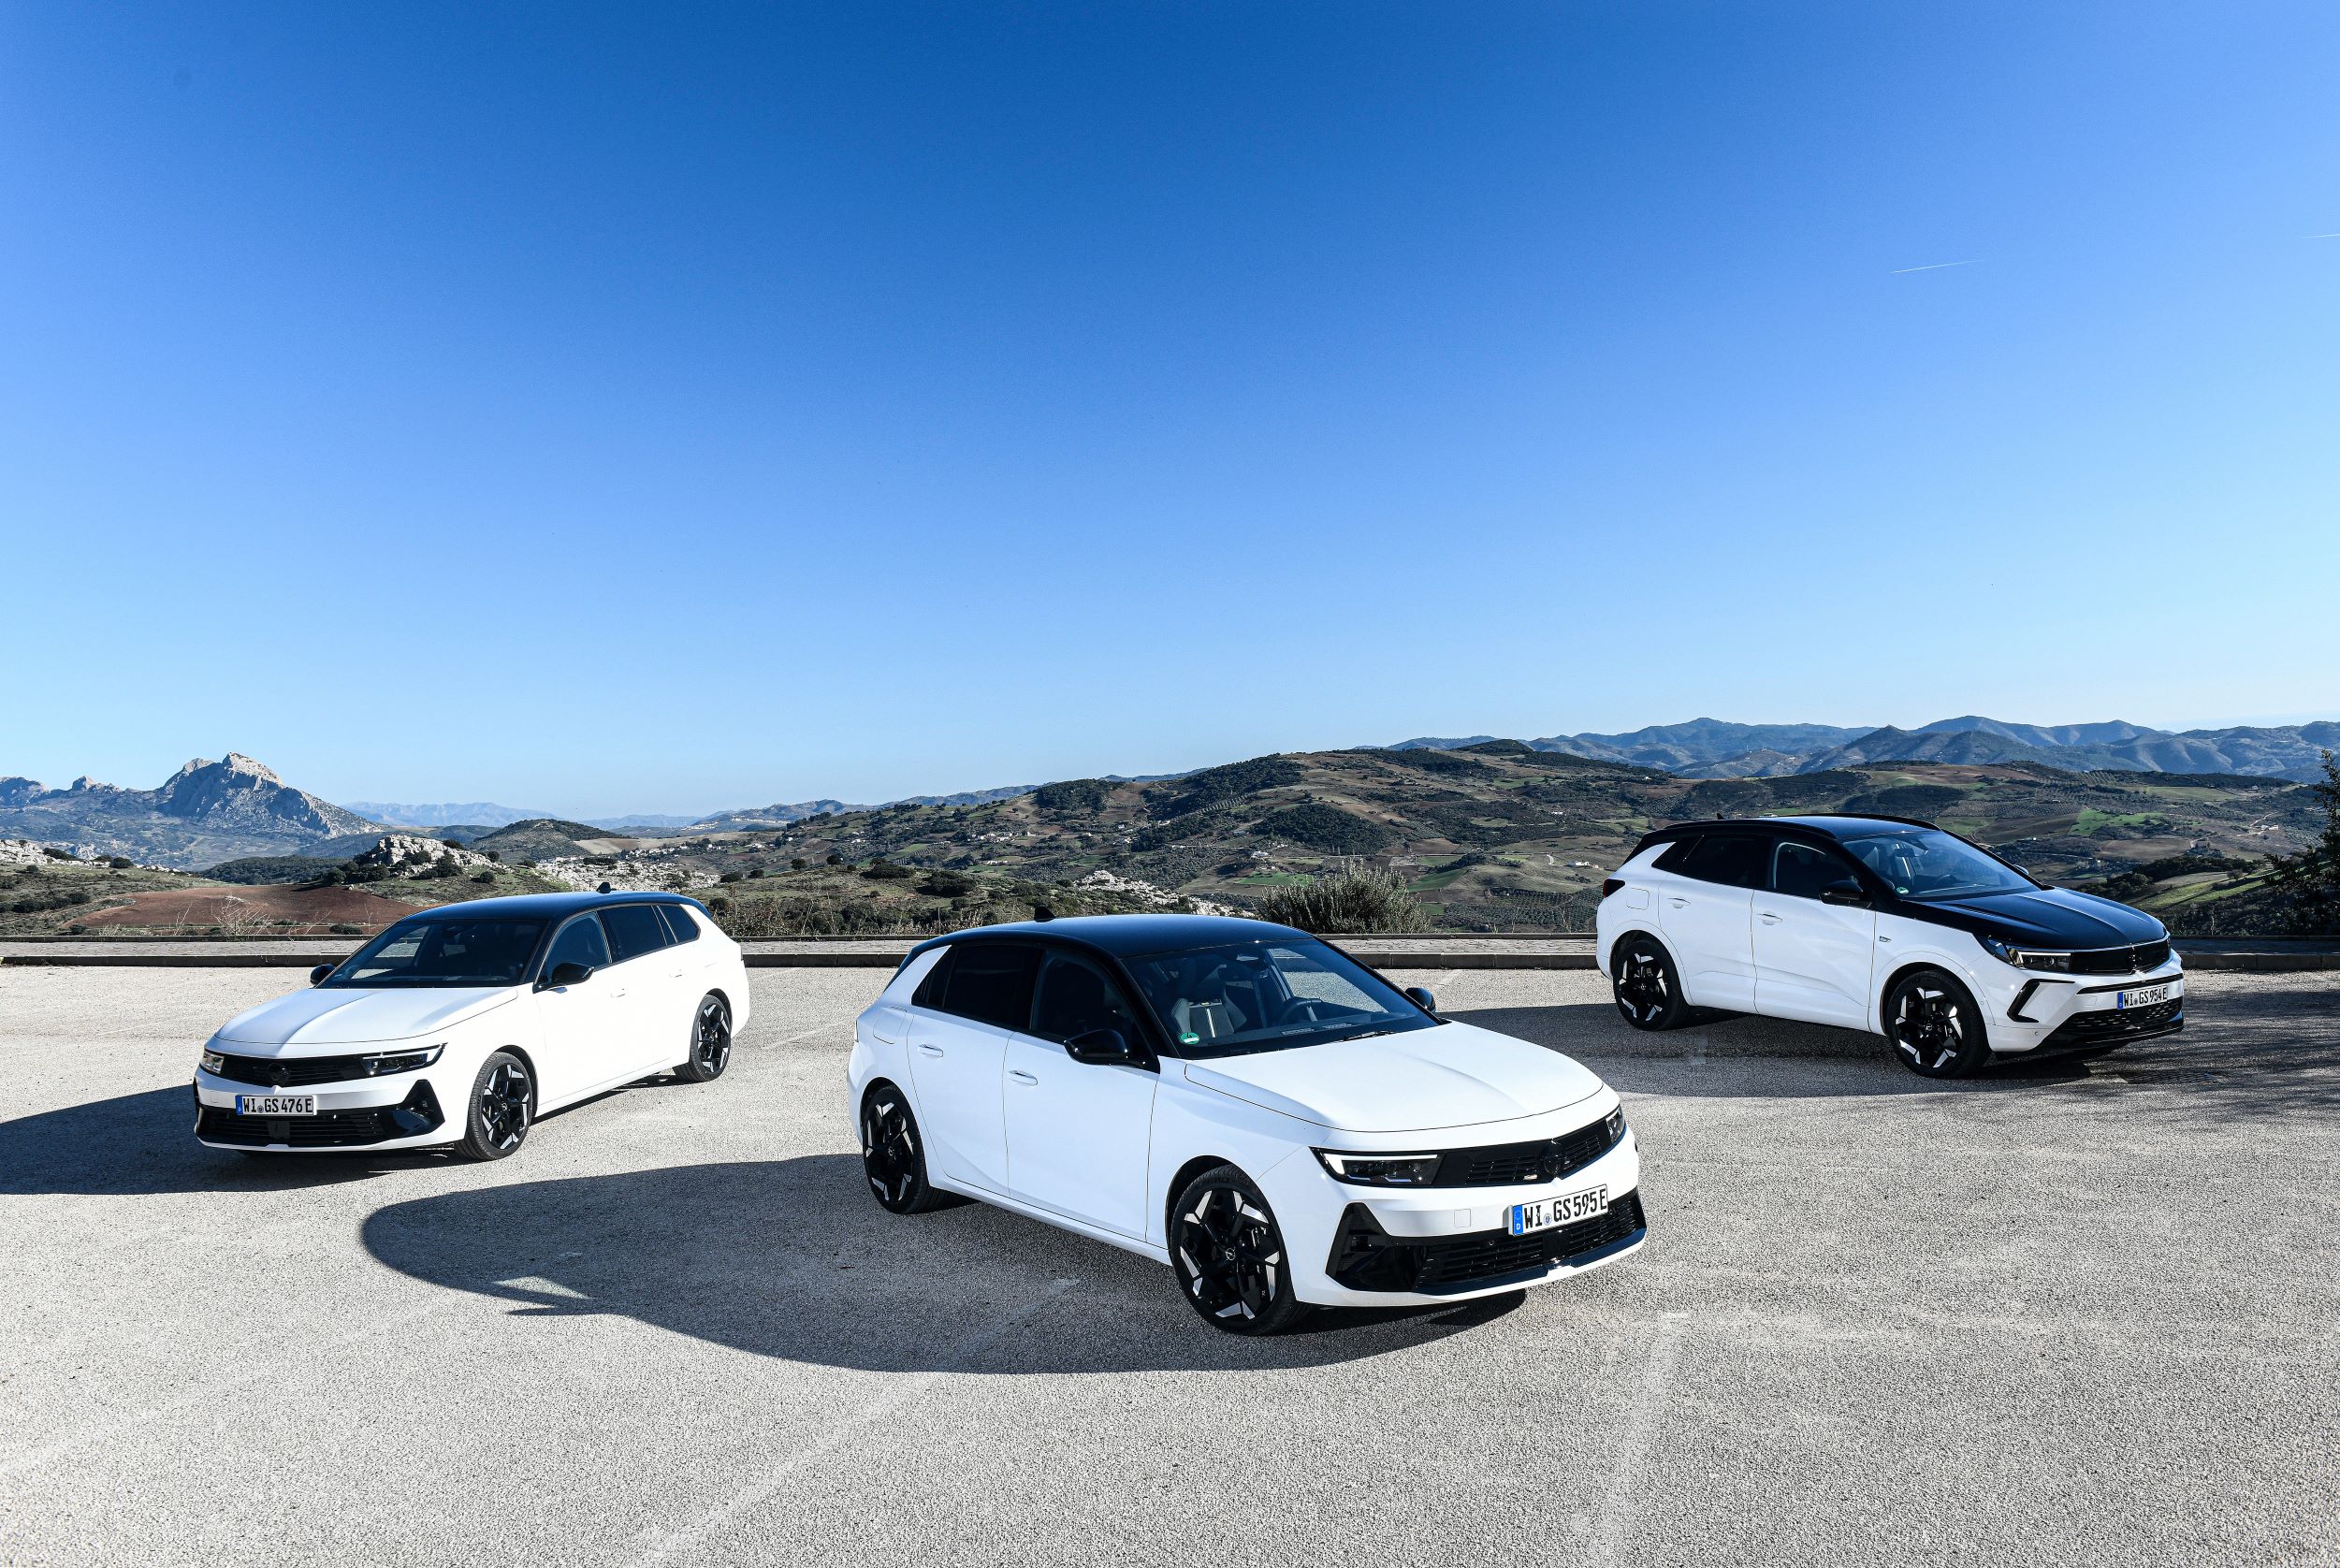 Three new Opel GSe models pictured in black and white paint schemes.